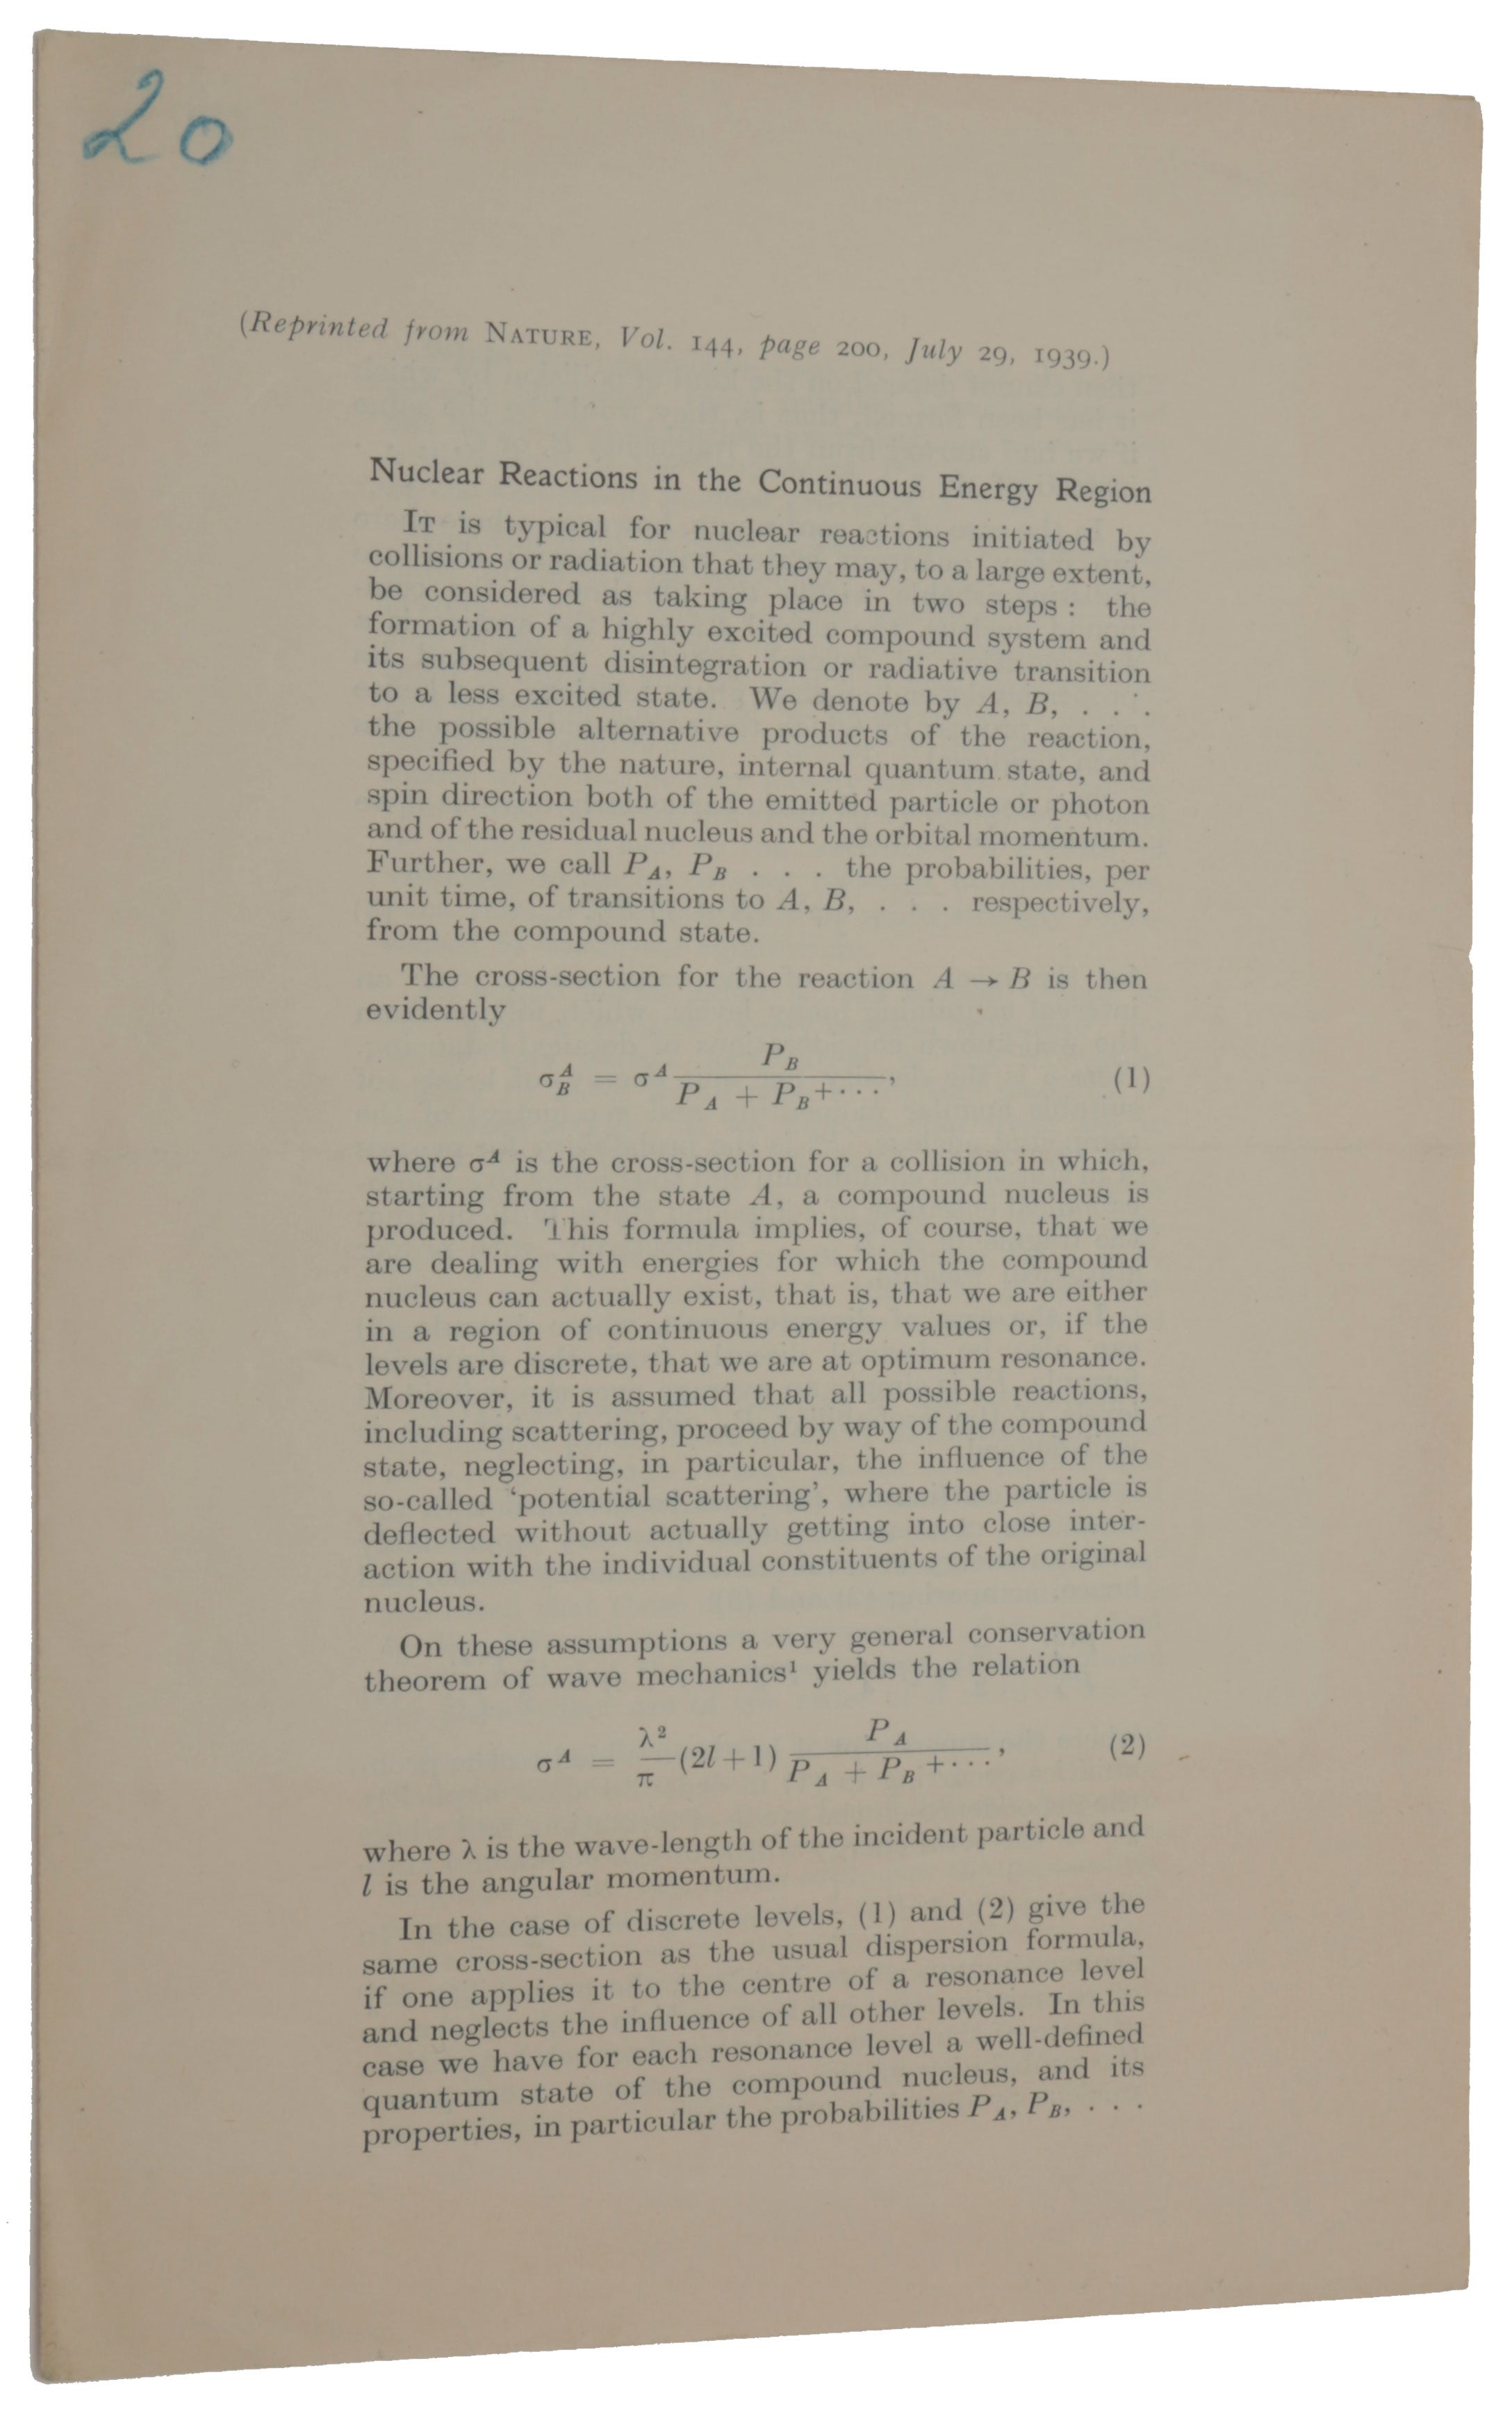 Item #5036 Nuclear reactions in the continuous energy region. Offprint from Nature, Vol. 144, July 29, 1939. Niels BOHR, Rudolf, PEIERLS, George PLACZEK.